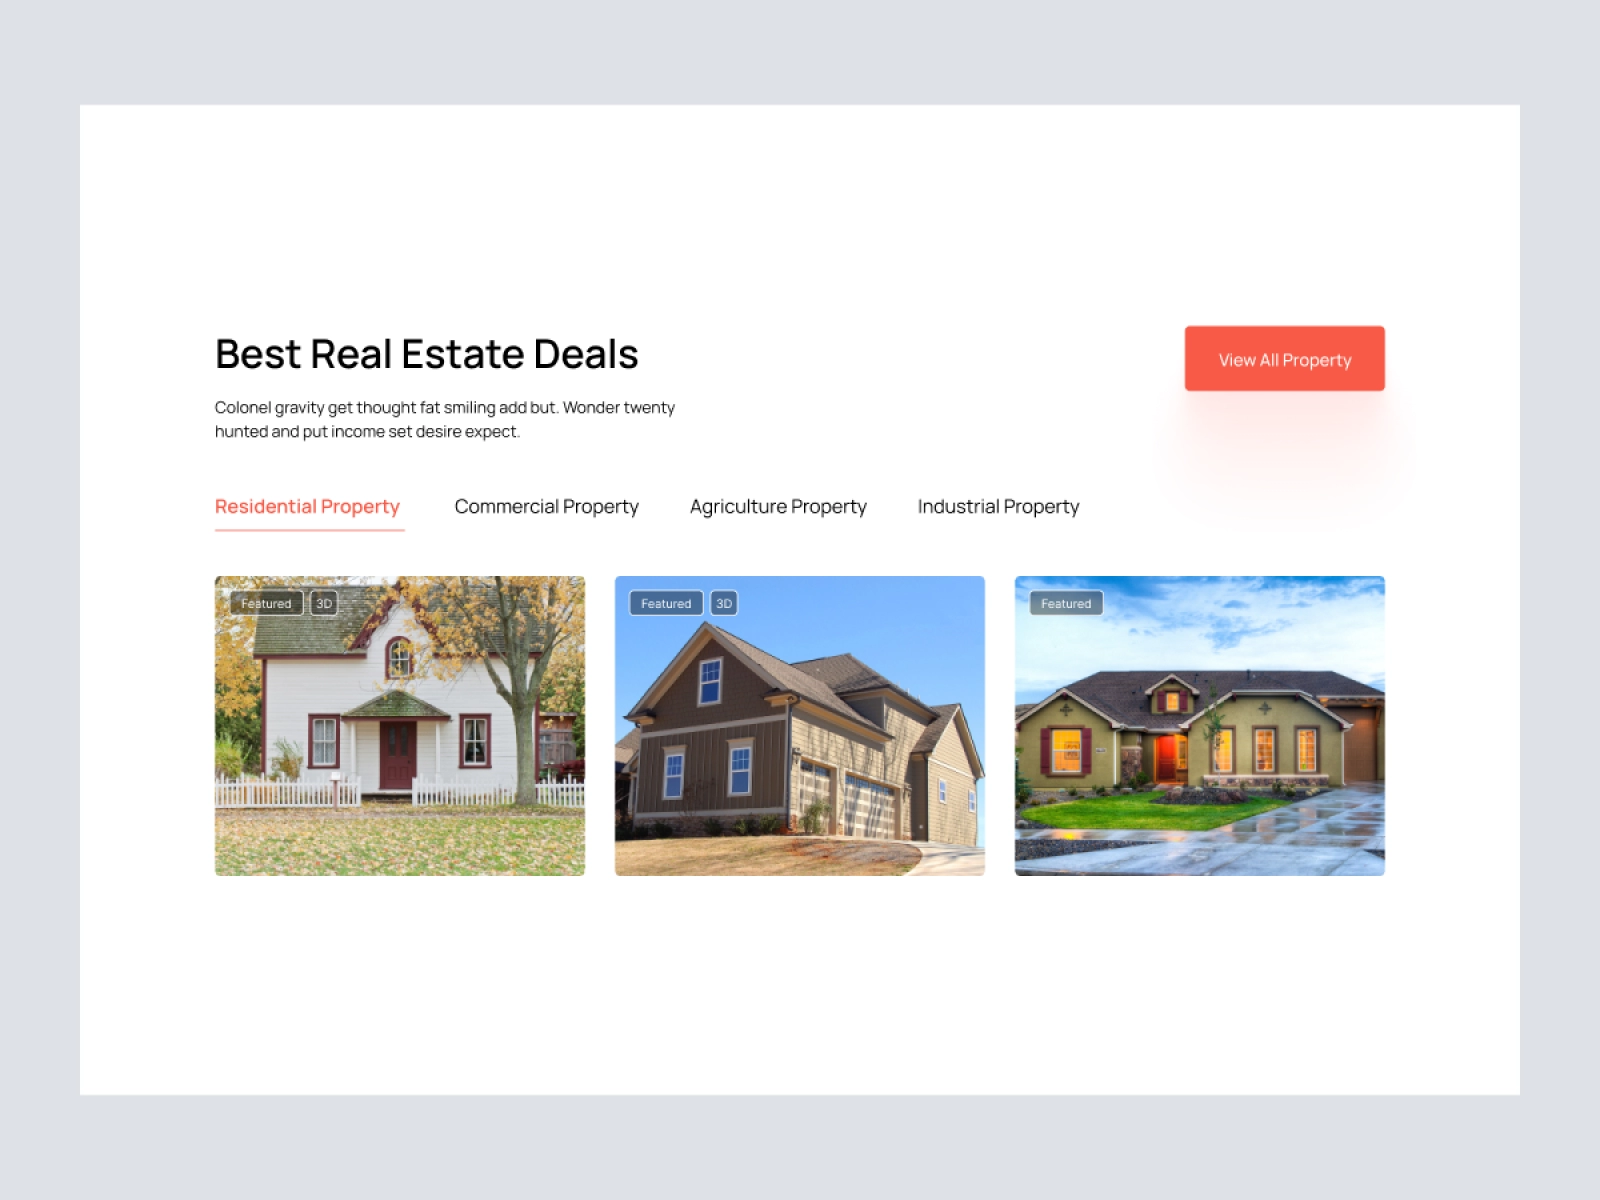 Construction Company / Real Estate Agency Website for Adobe XD - screen 5